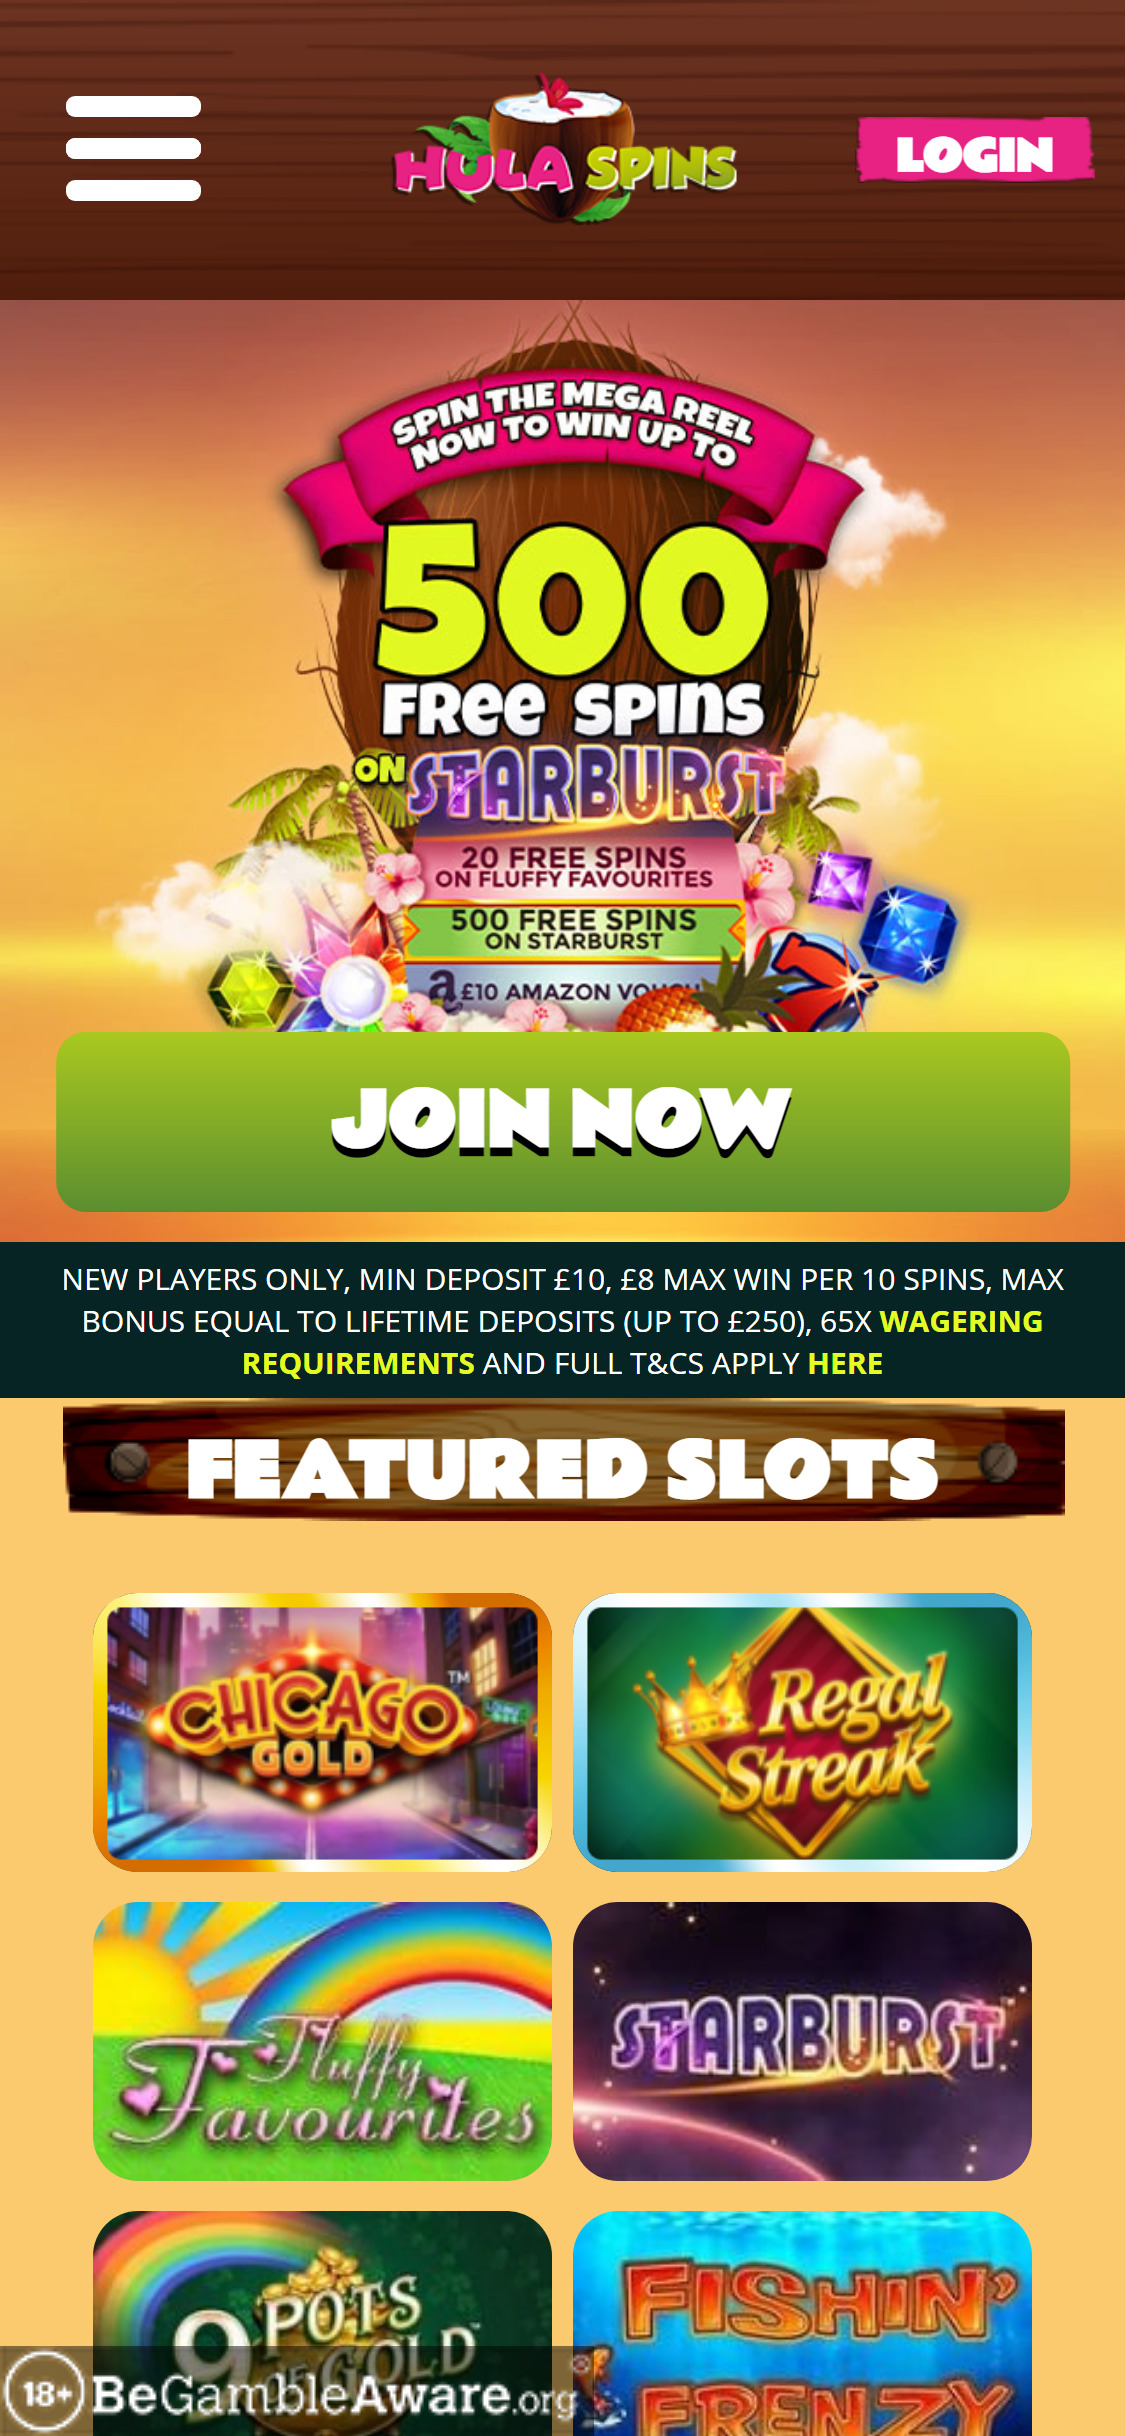 Hula Spins Casino Mobile Review